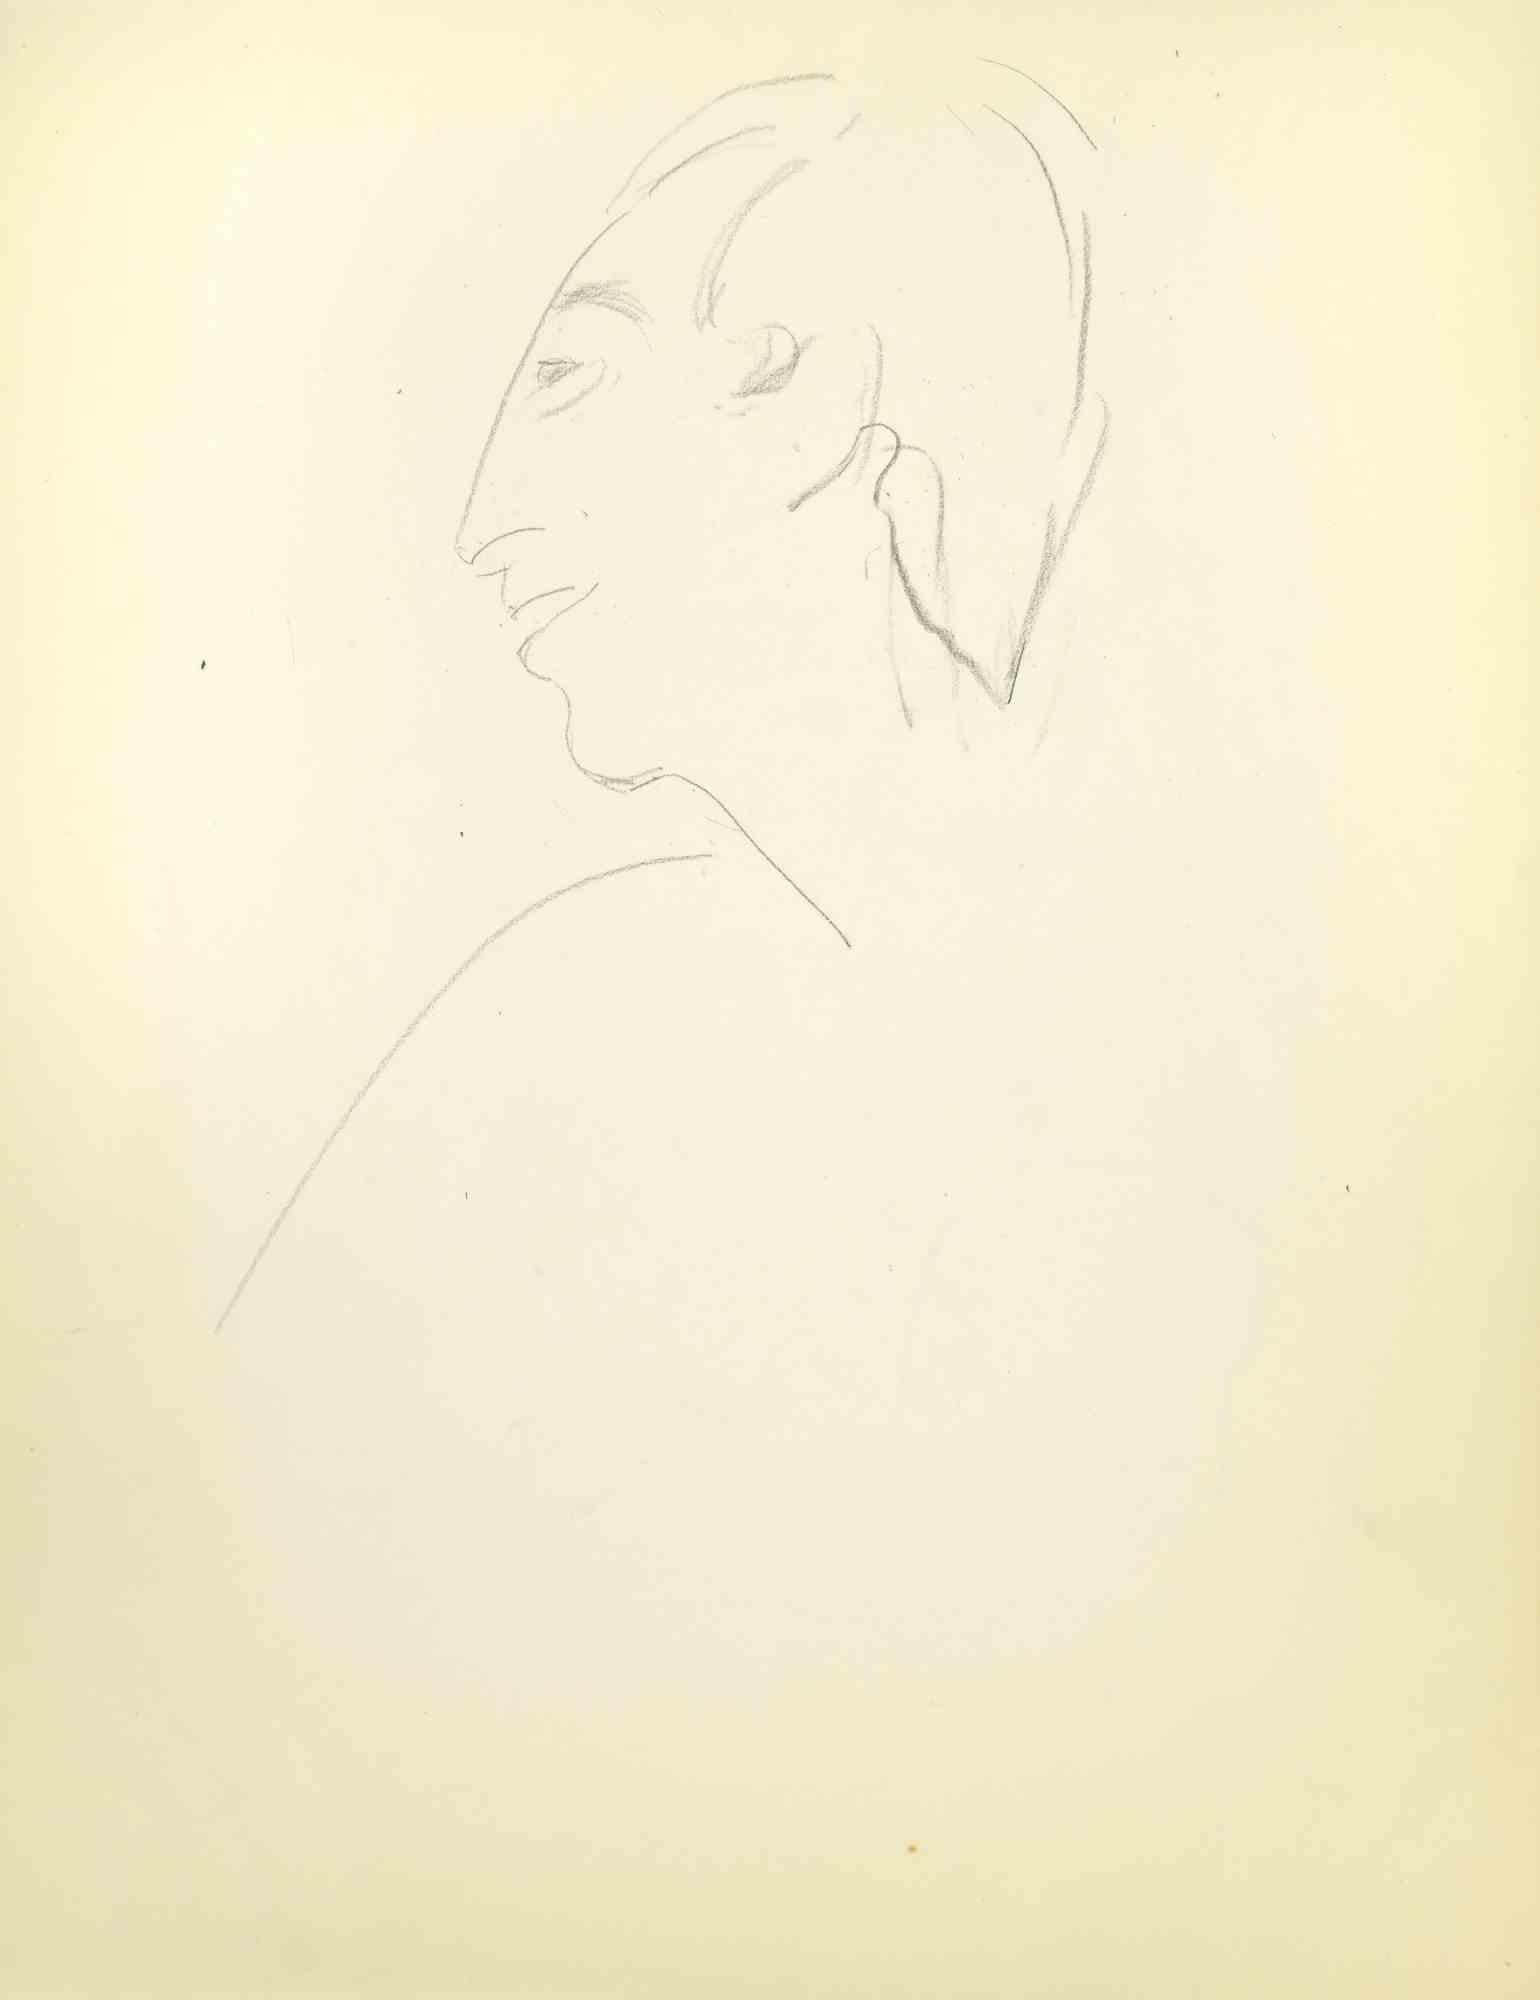 Sketch for a Portrait is a drawing on paper realized in the Mid-20th Century by Flor David.

Pencil on Creamy-colored paper.

Good conditions.

Flor David (1891-1958) ): pseudonym of David Florence. Pastel painter. He was a pupil of Desirè Lucas. He